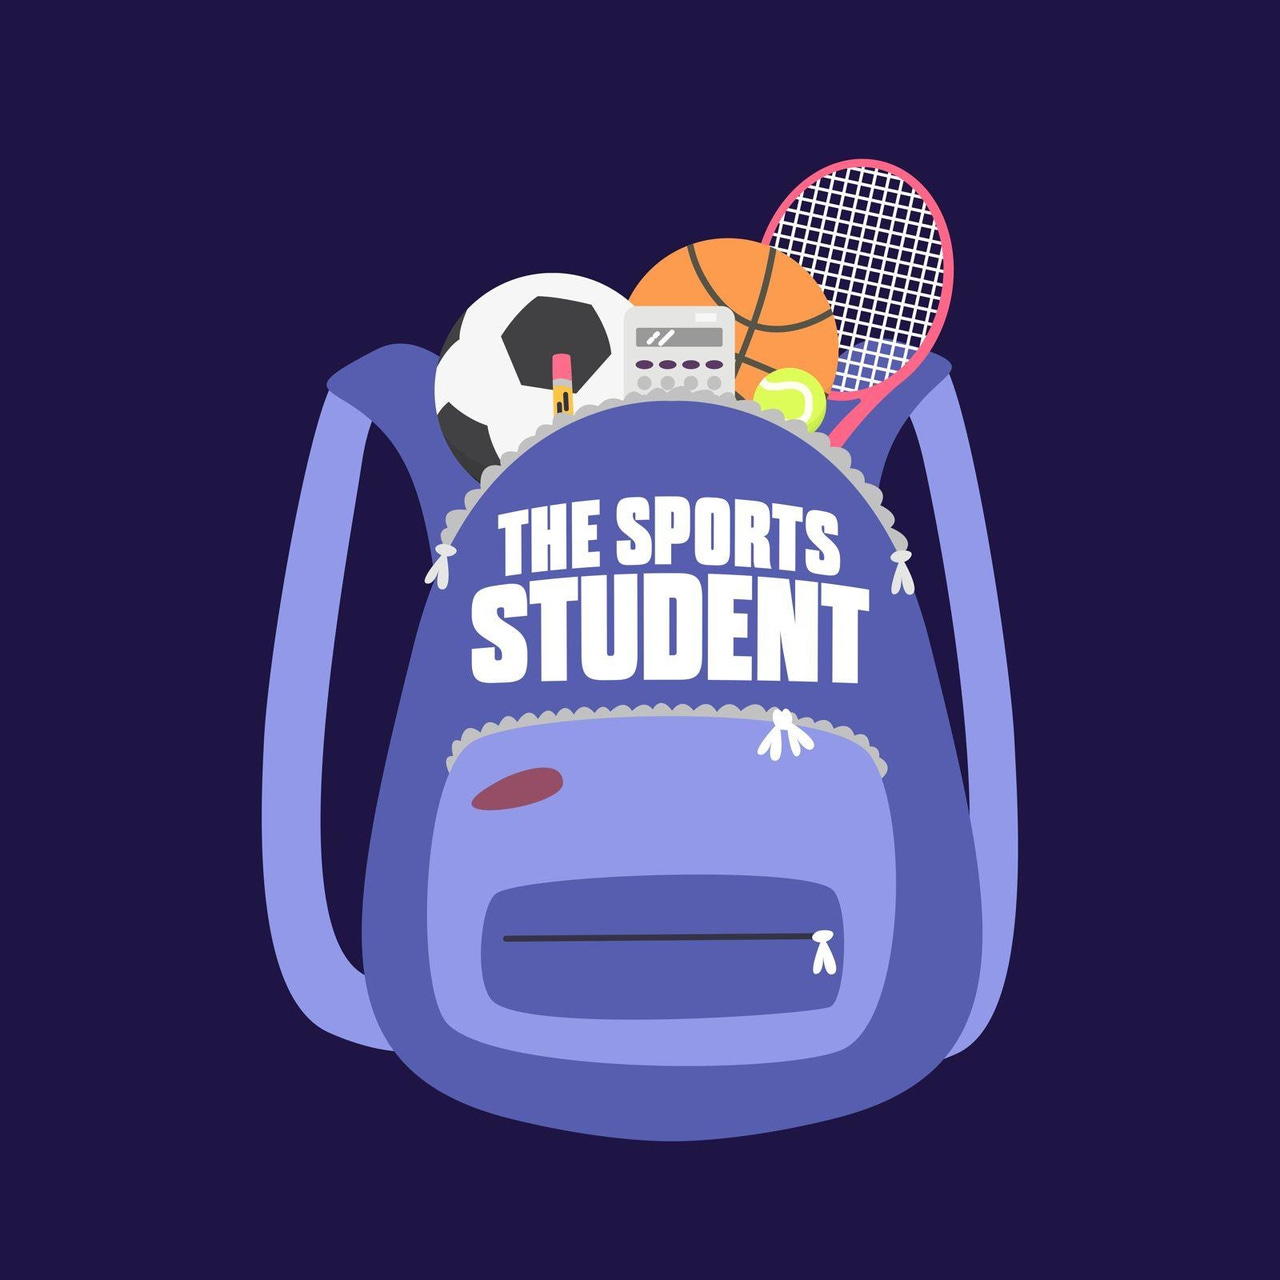 The Sports Student